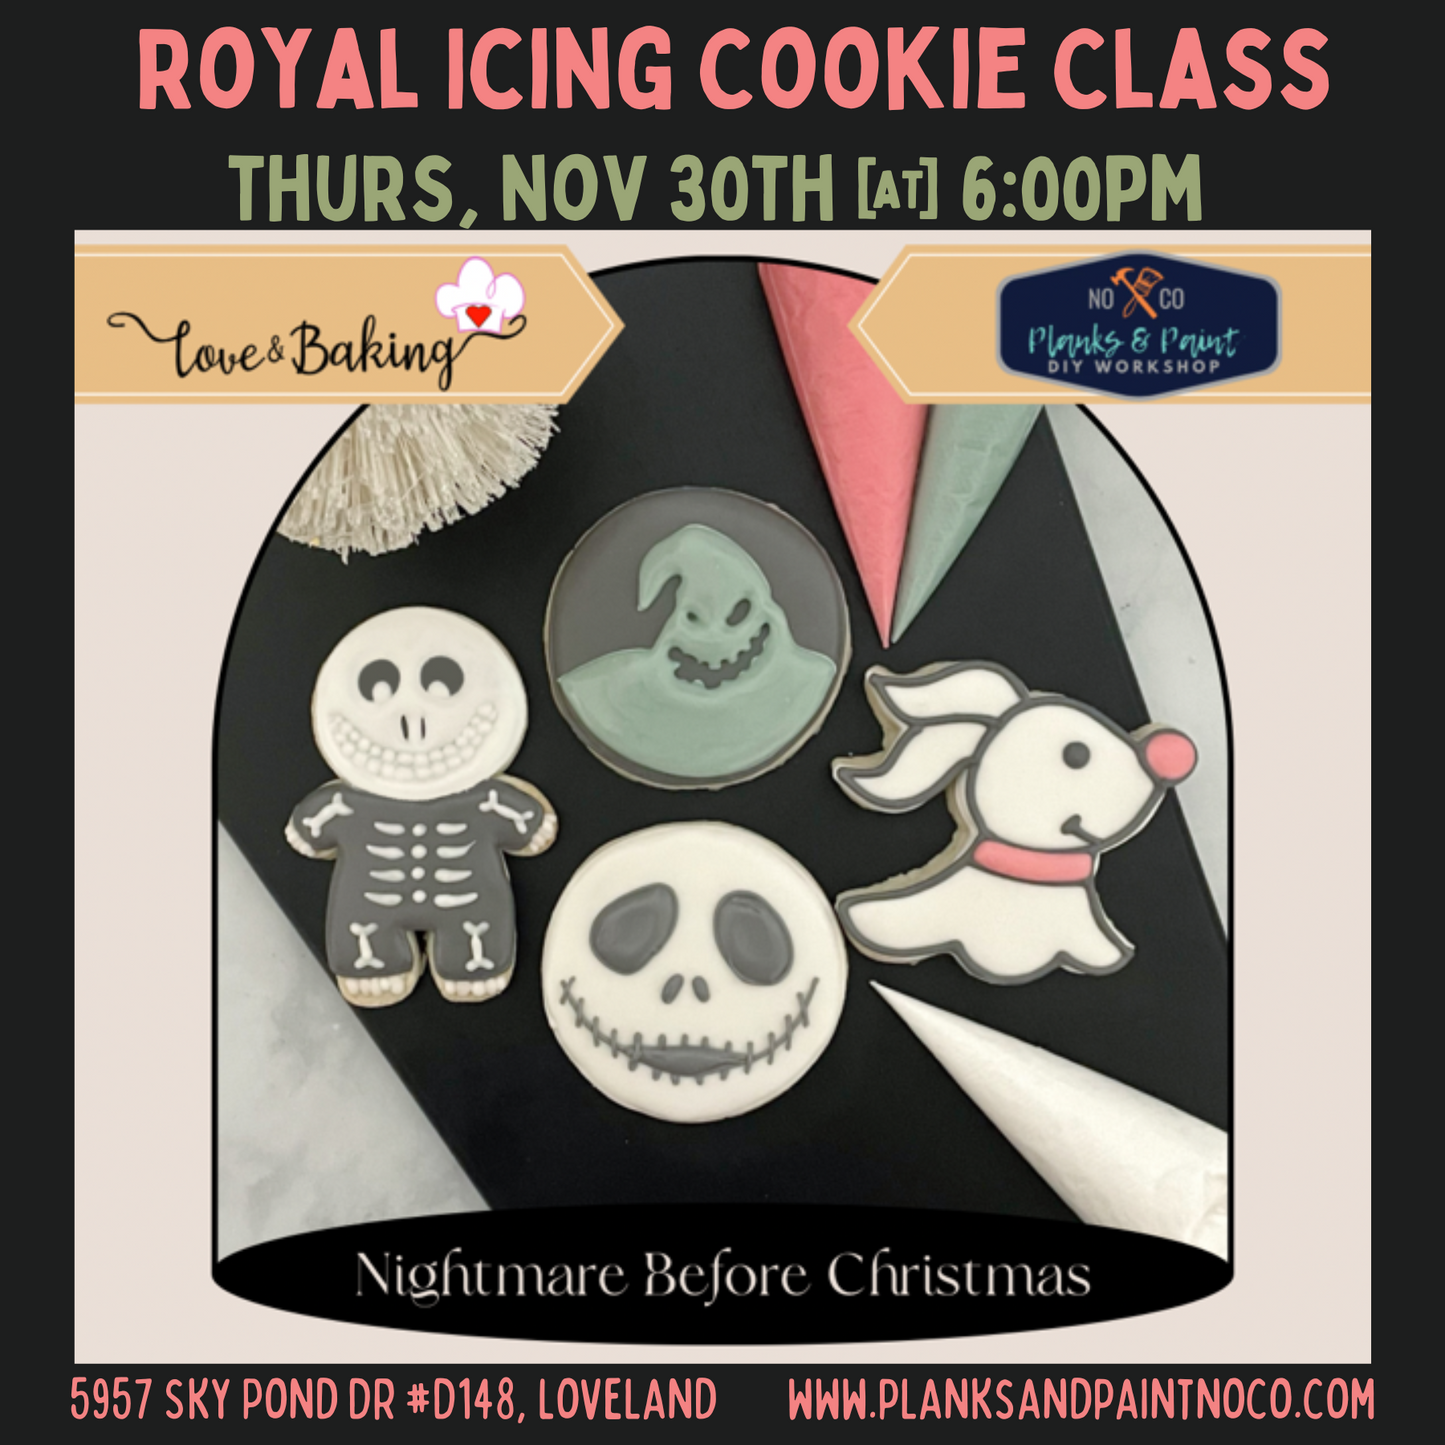 Nightmare Before Christmas Royal Icing Cookie Decorating Class